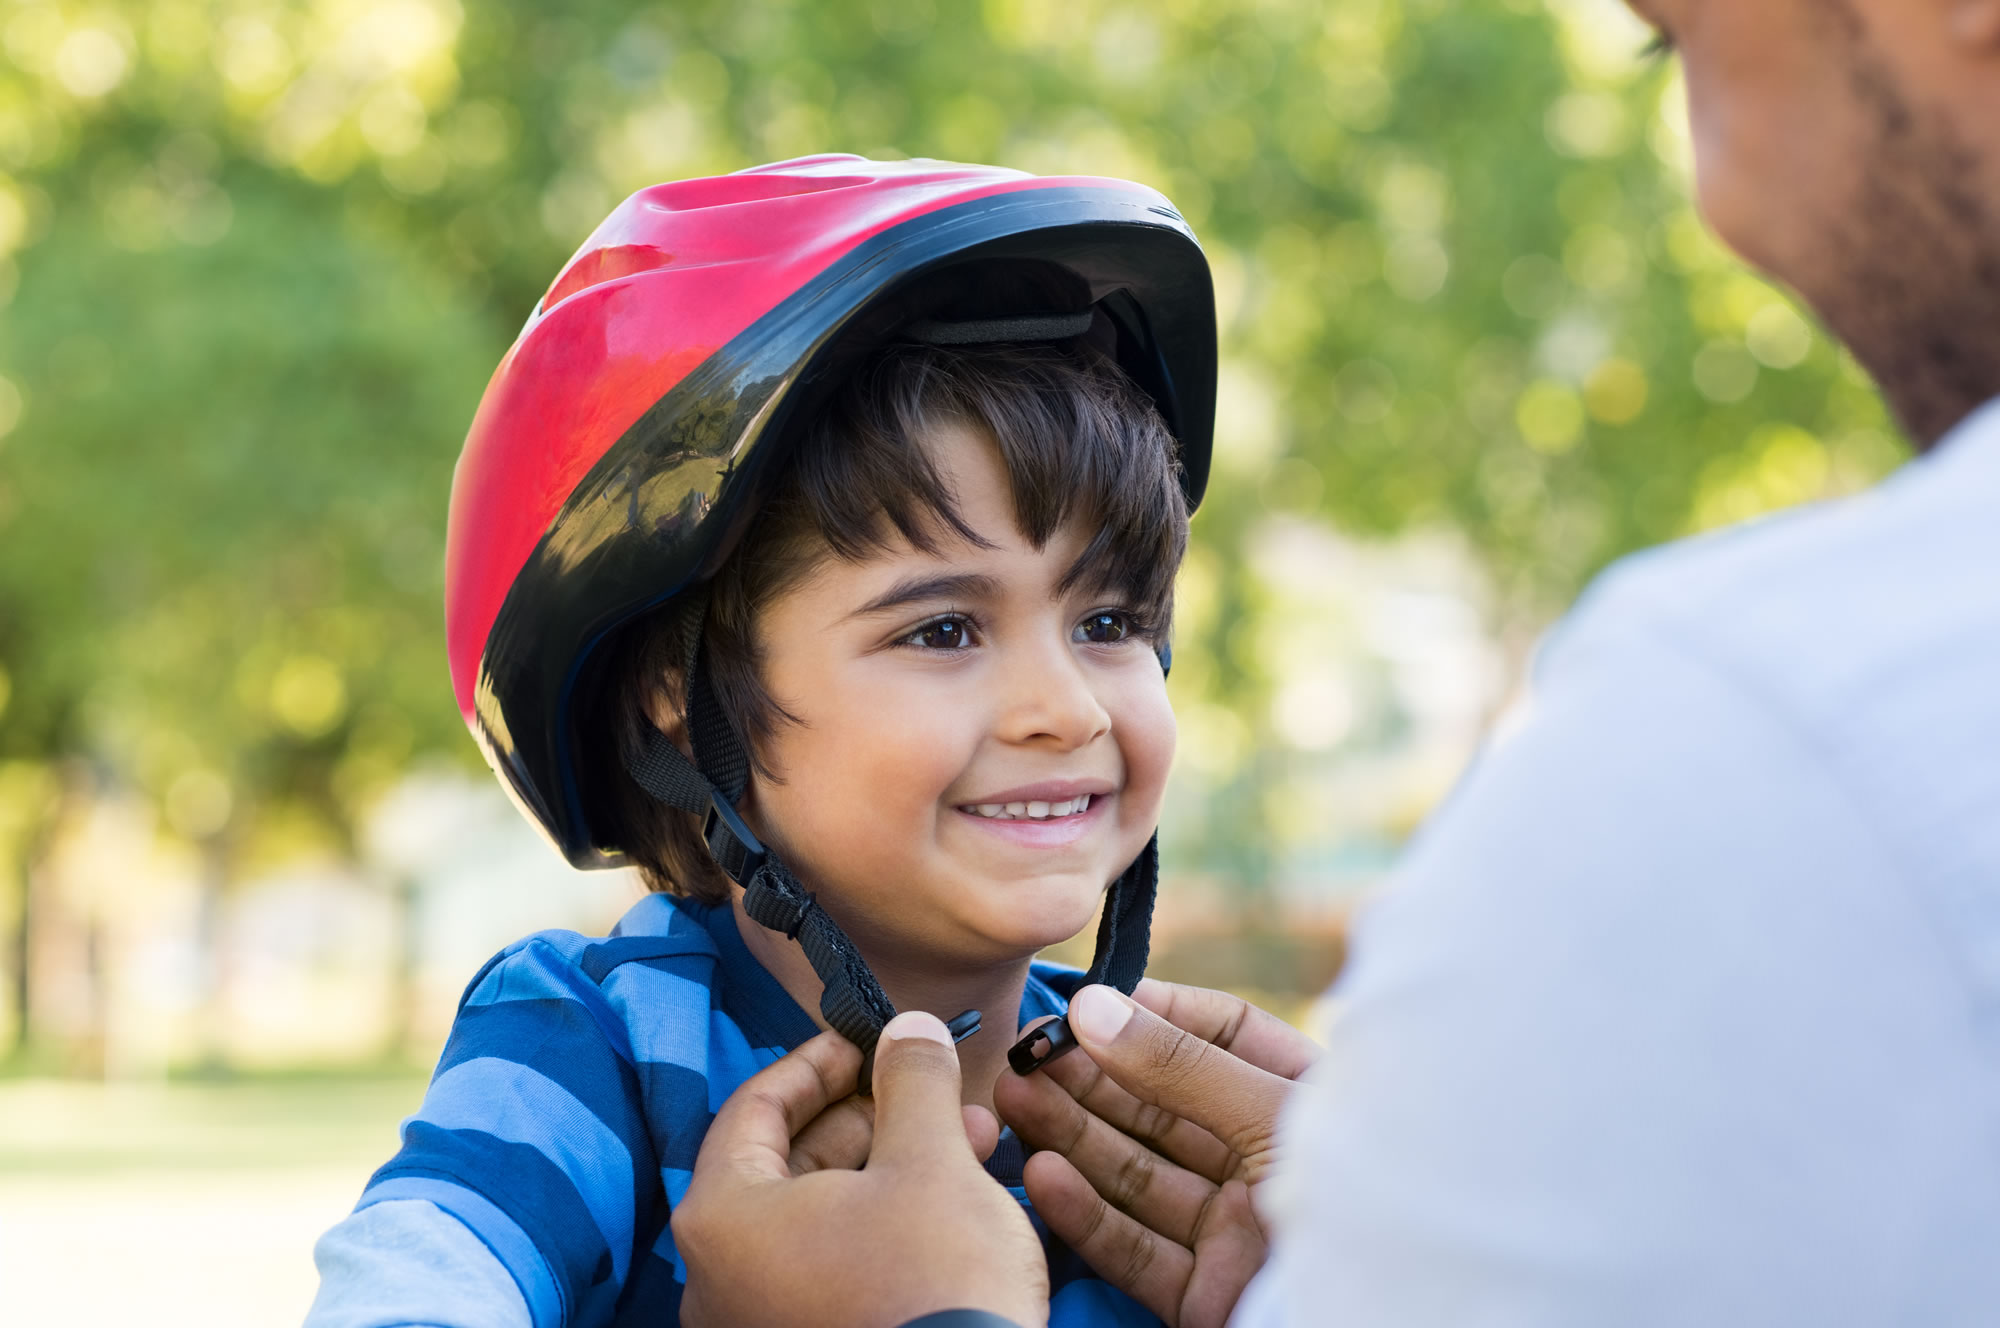 parents-charged-if-kids-arent-wearning-helmet